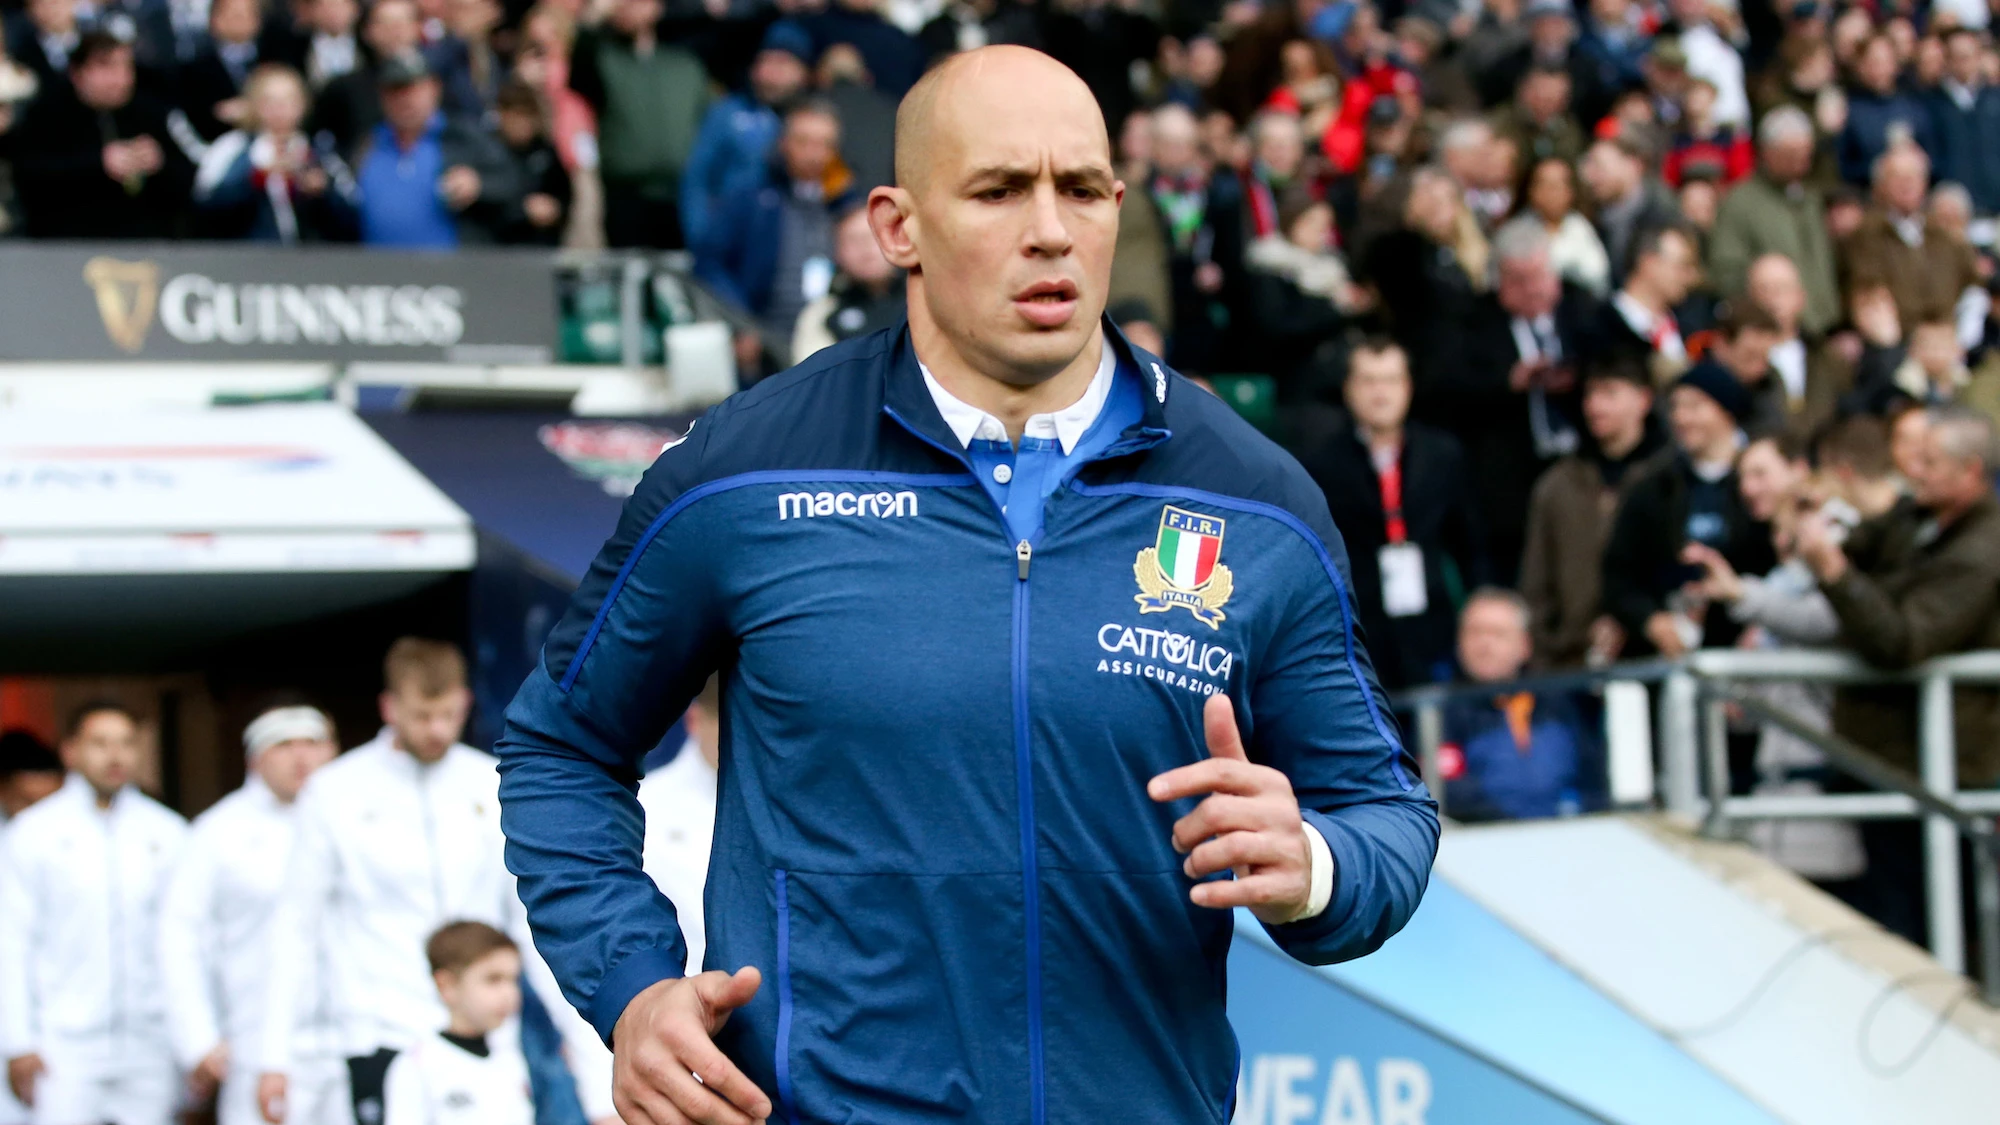 Sergio Parisse makes his way to the pitch 9/3/2019